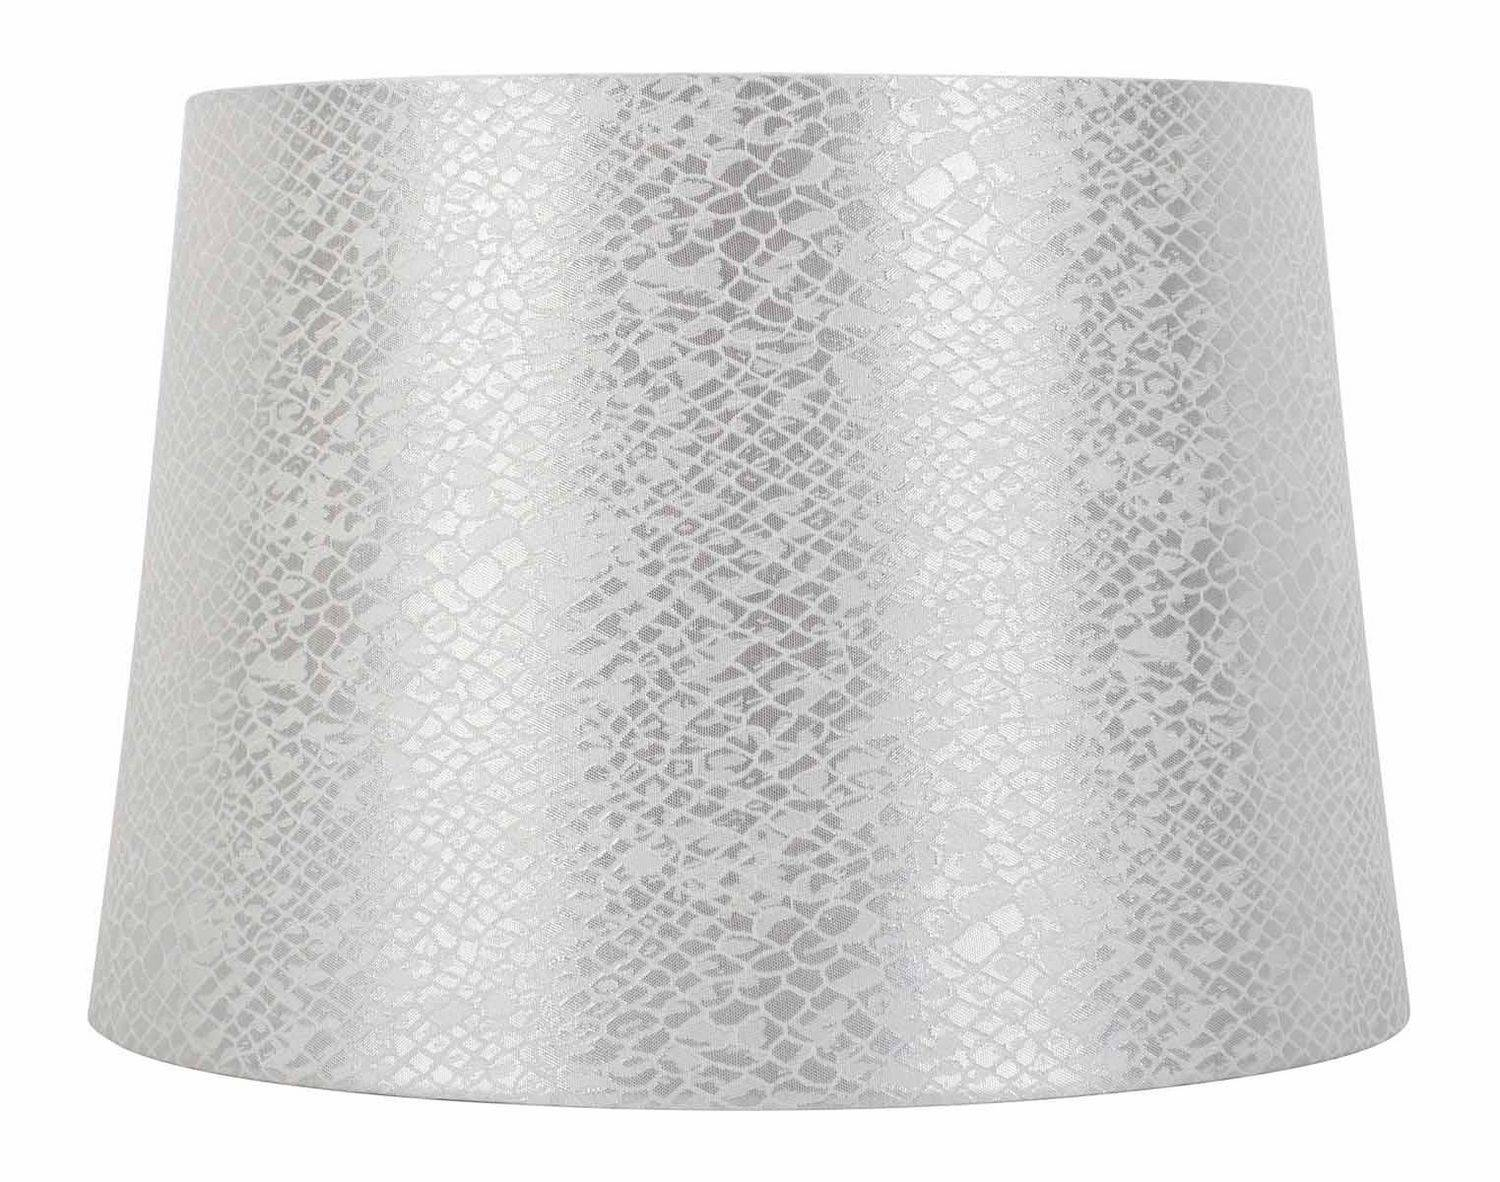 Appealing Cylinder Lamp Shades Lighting Extra Tall Drum in sizing 1500 X 1182